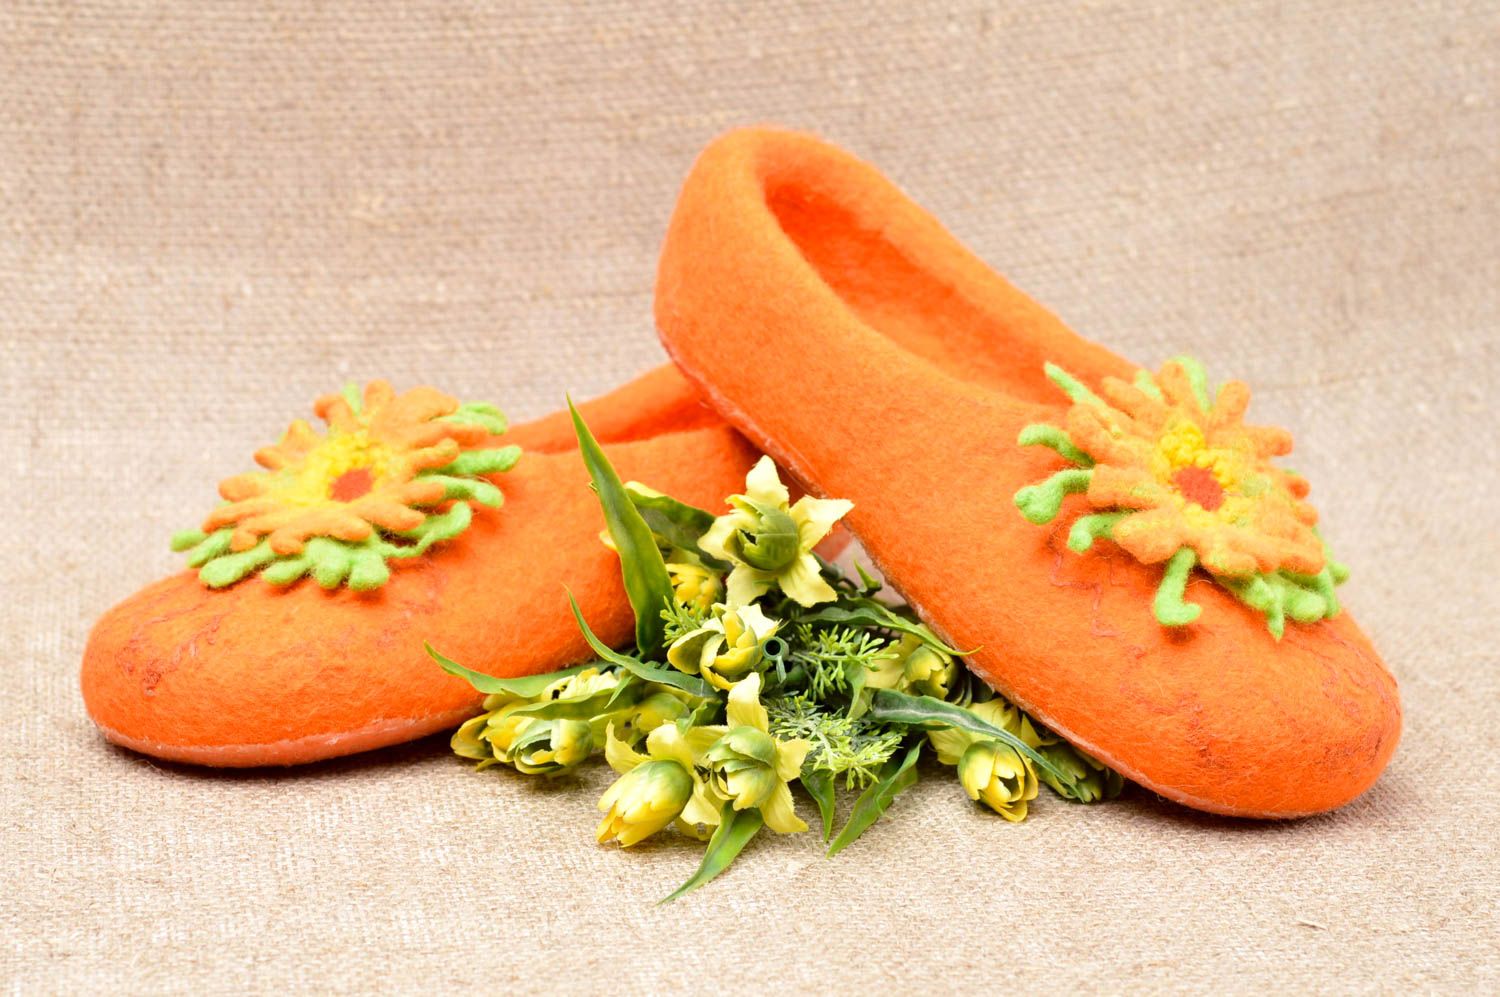 Handmade slippers for women best slippers wool slippers womens accessories photo 1